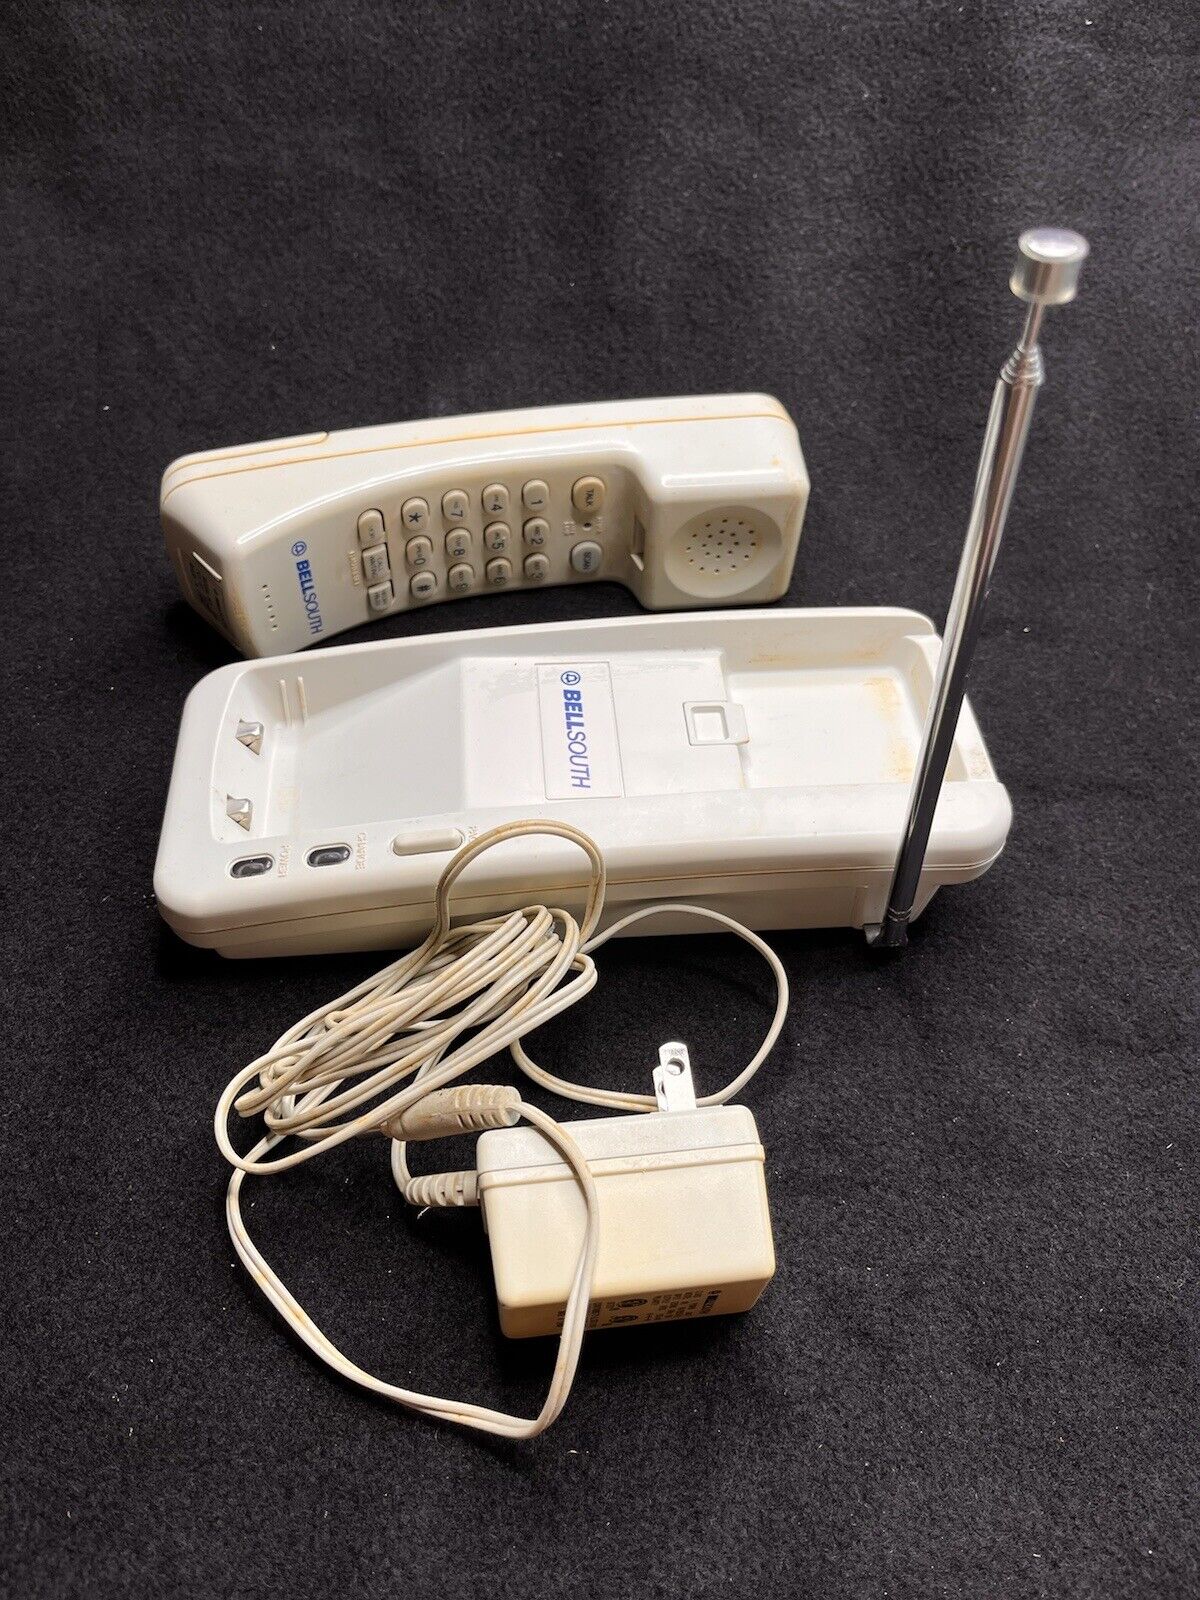 AT&T White Cordless Telephone 4336 TESTED Bell South